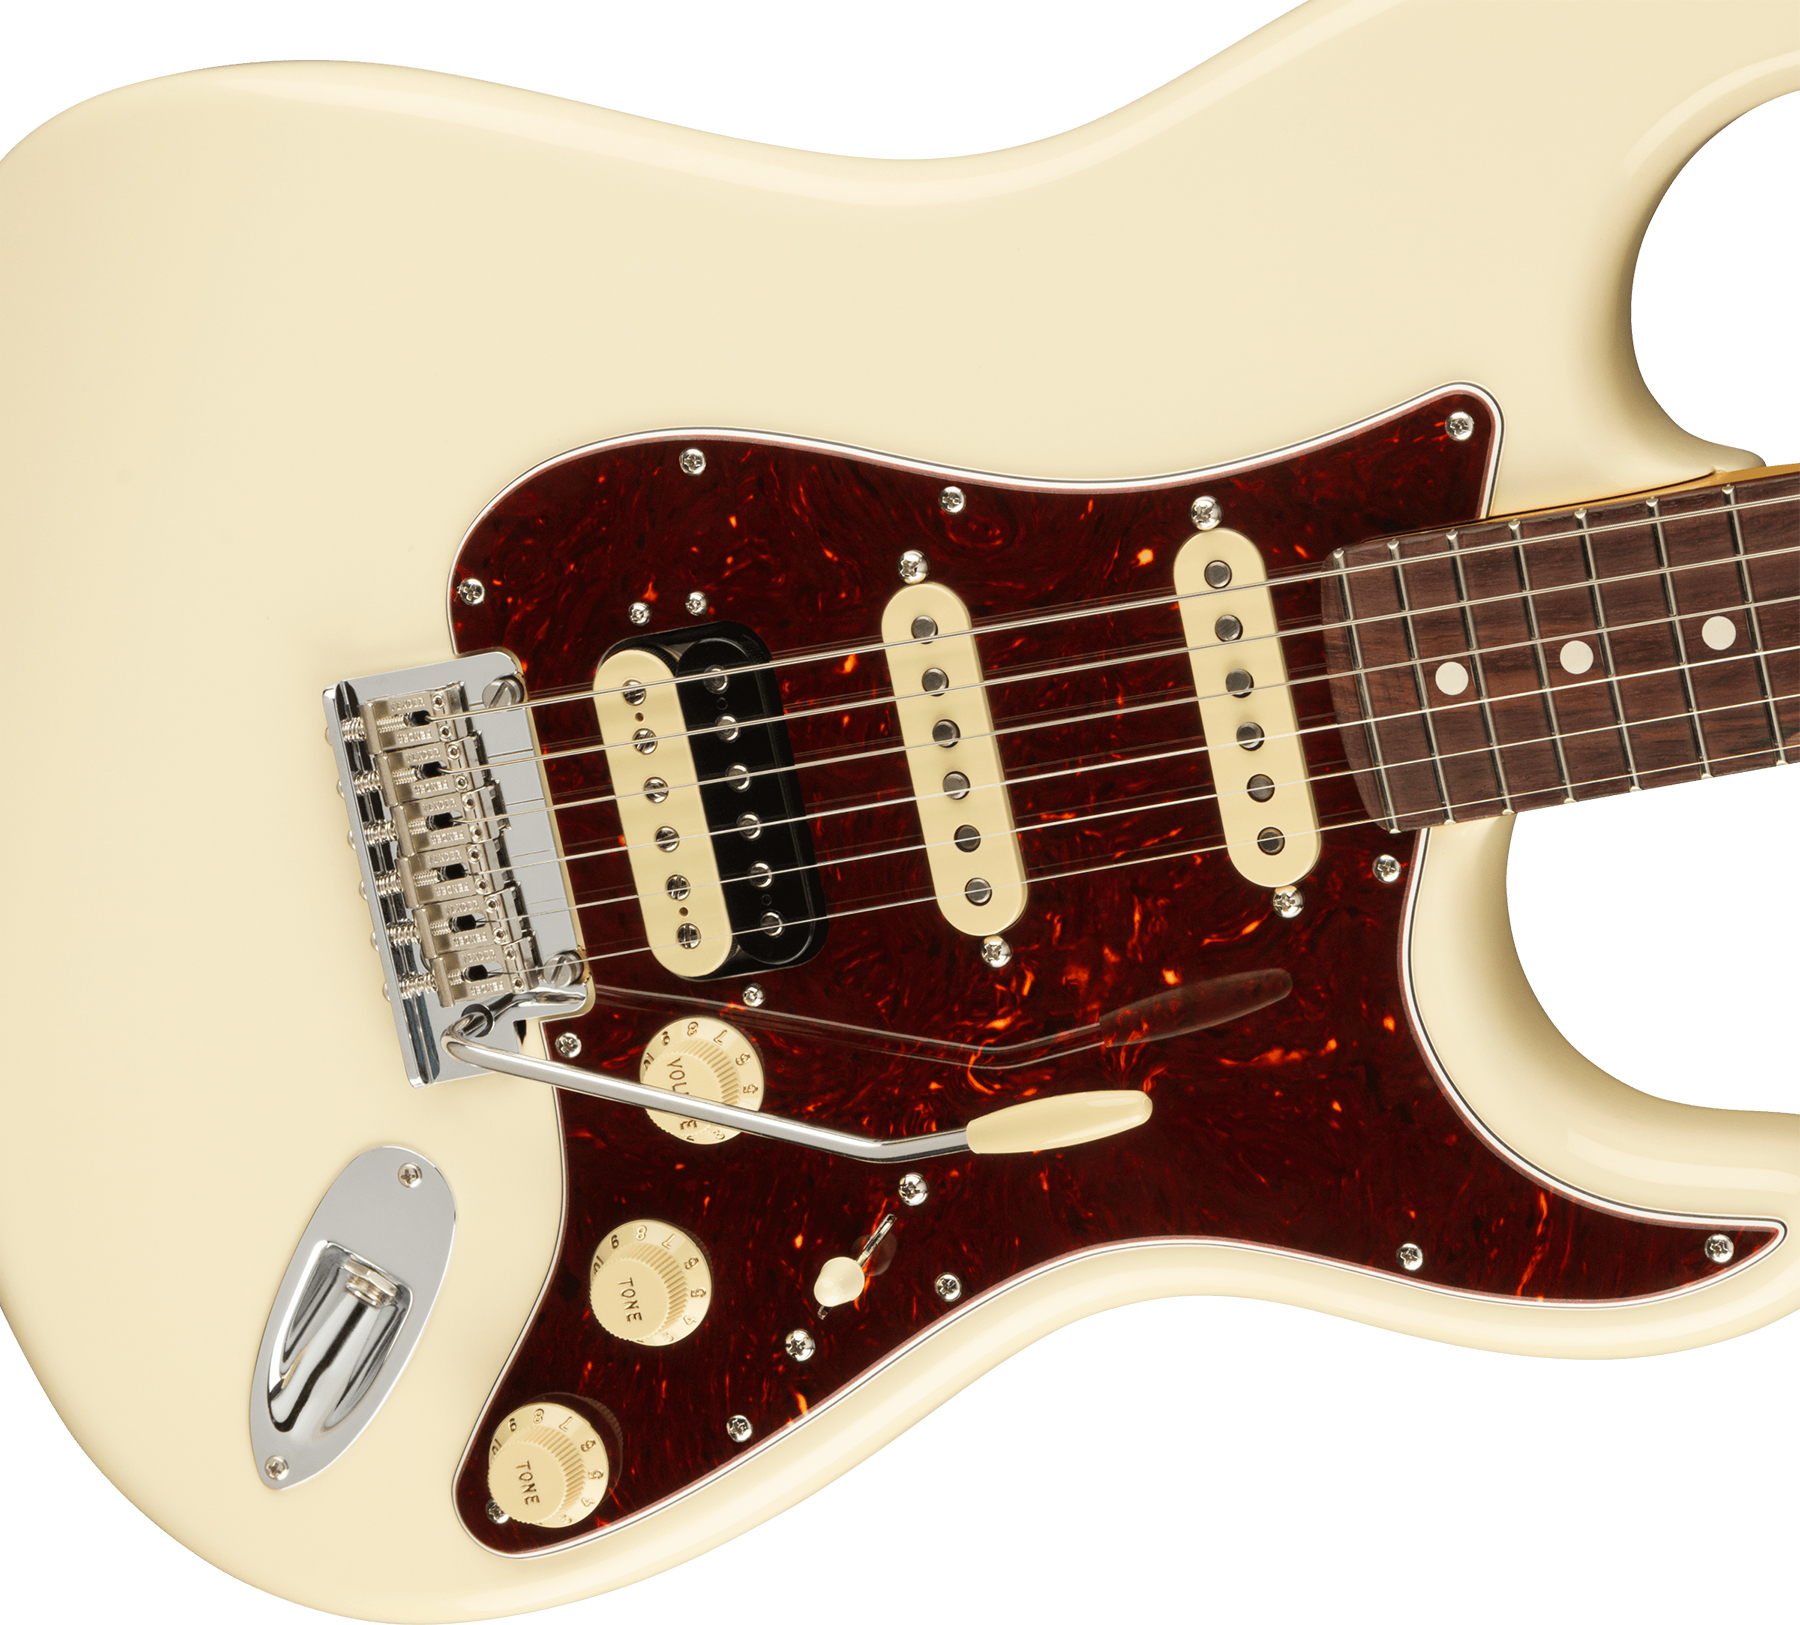 Fender Strat American Professional Ii Hss Usa Rw - Olympic White - Guitare Électrique Forme Str - Variation 2